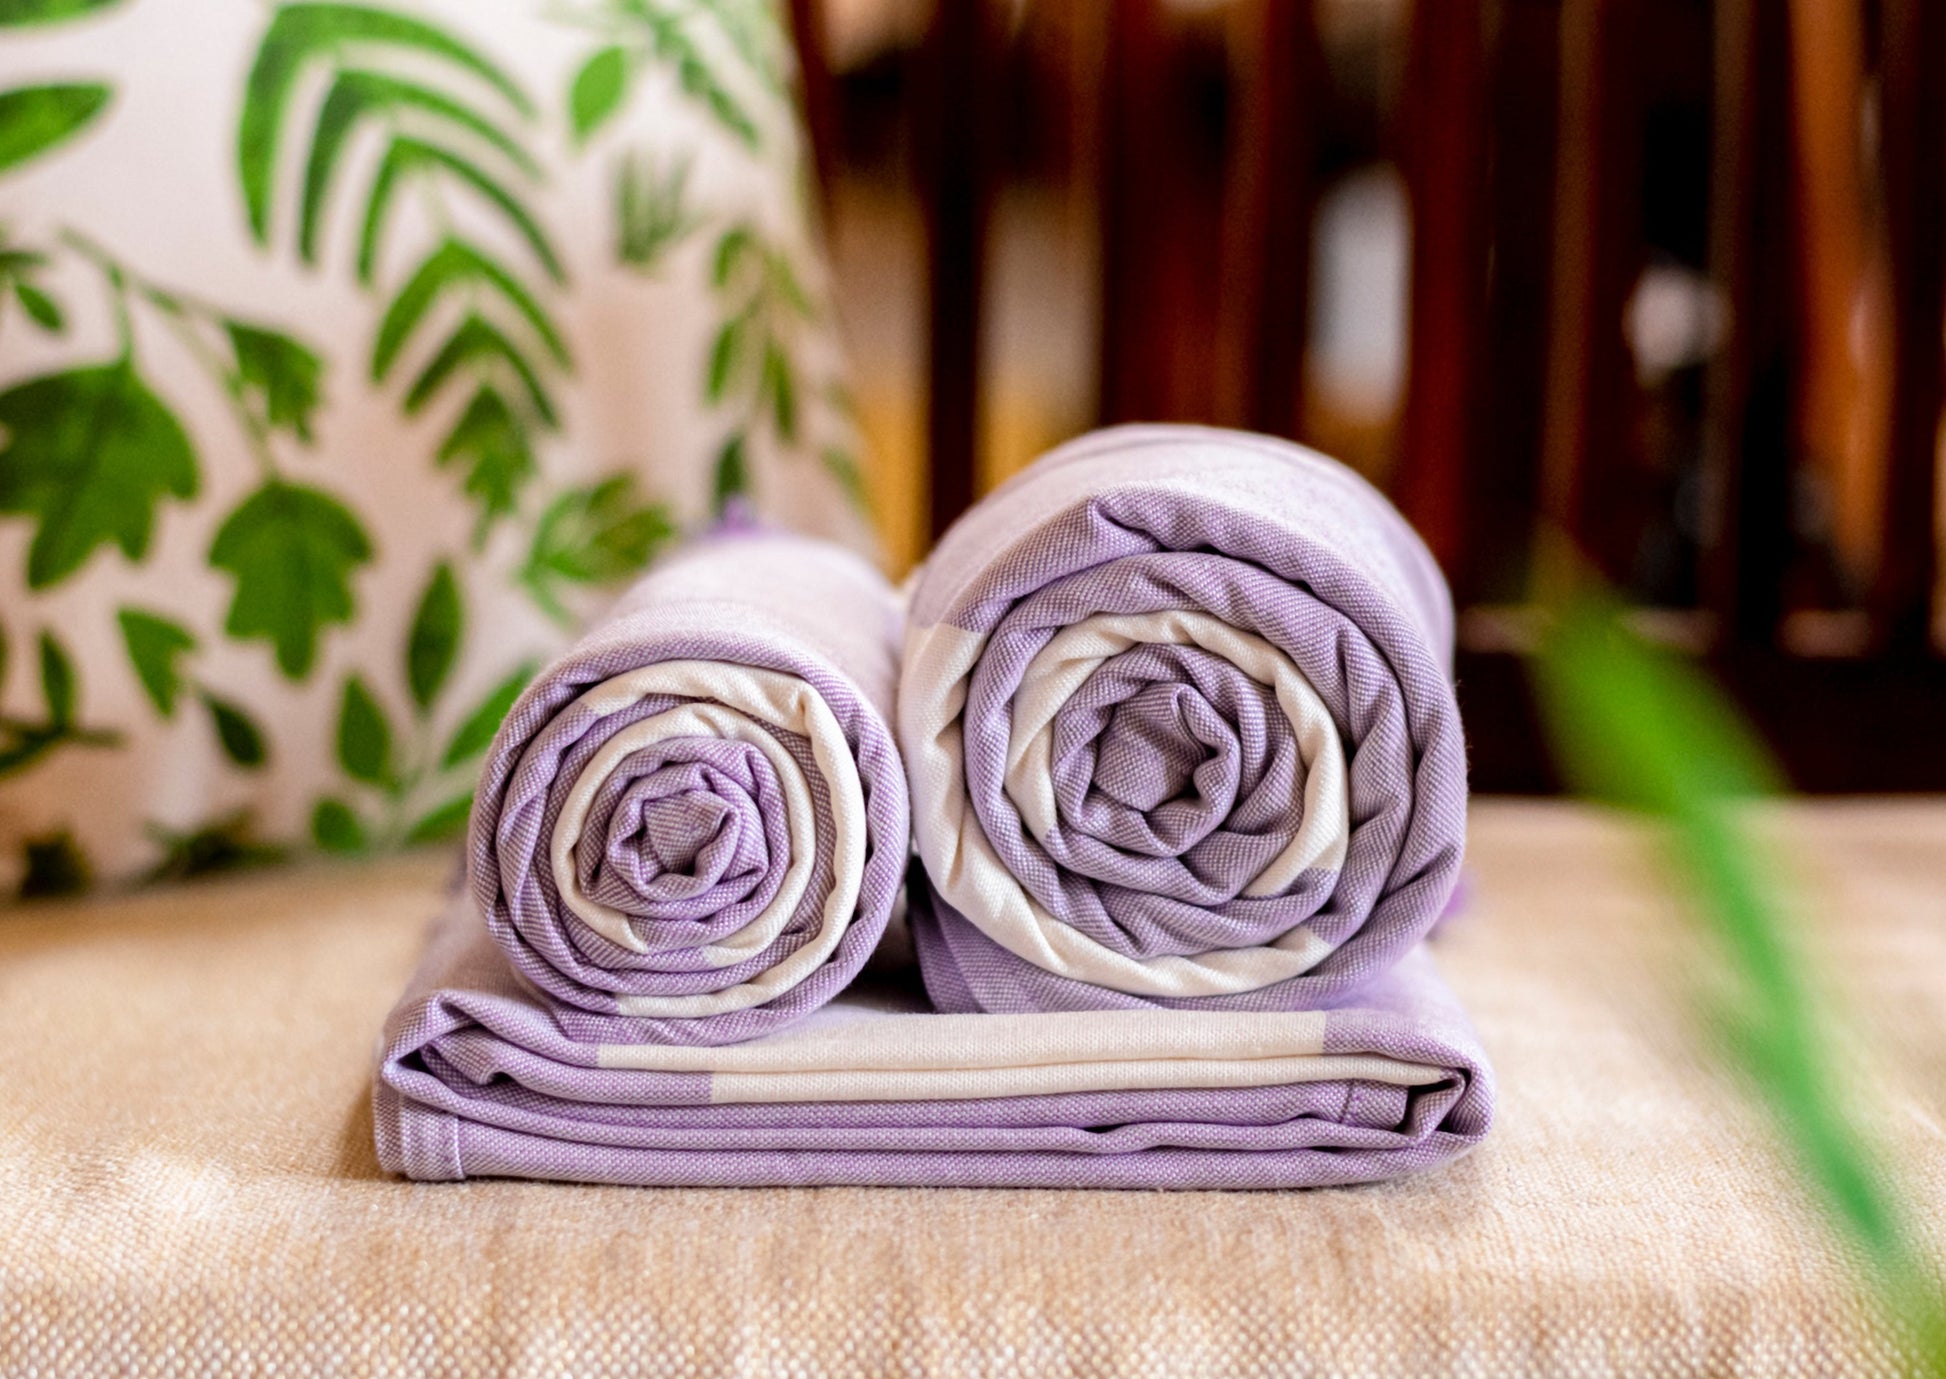 Sustainable Bamboo Bath Towel - Lavender Aura - Made in Turkey – Mosobam®